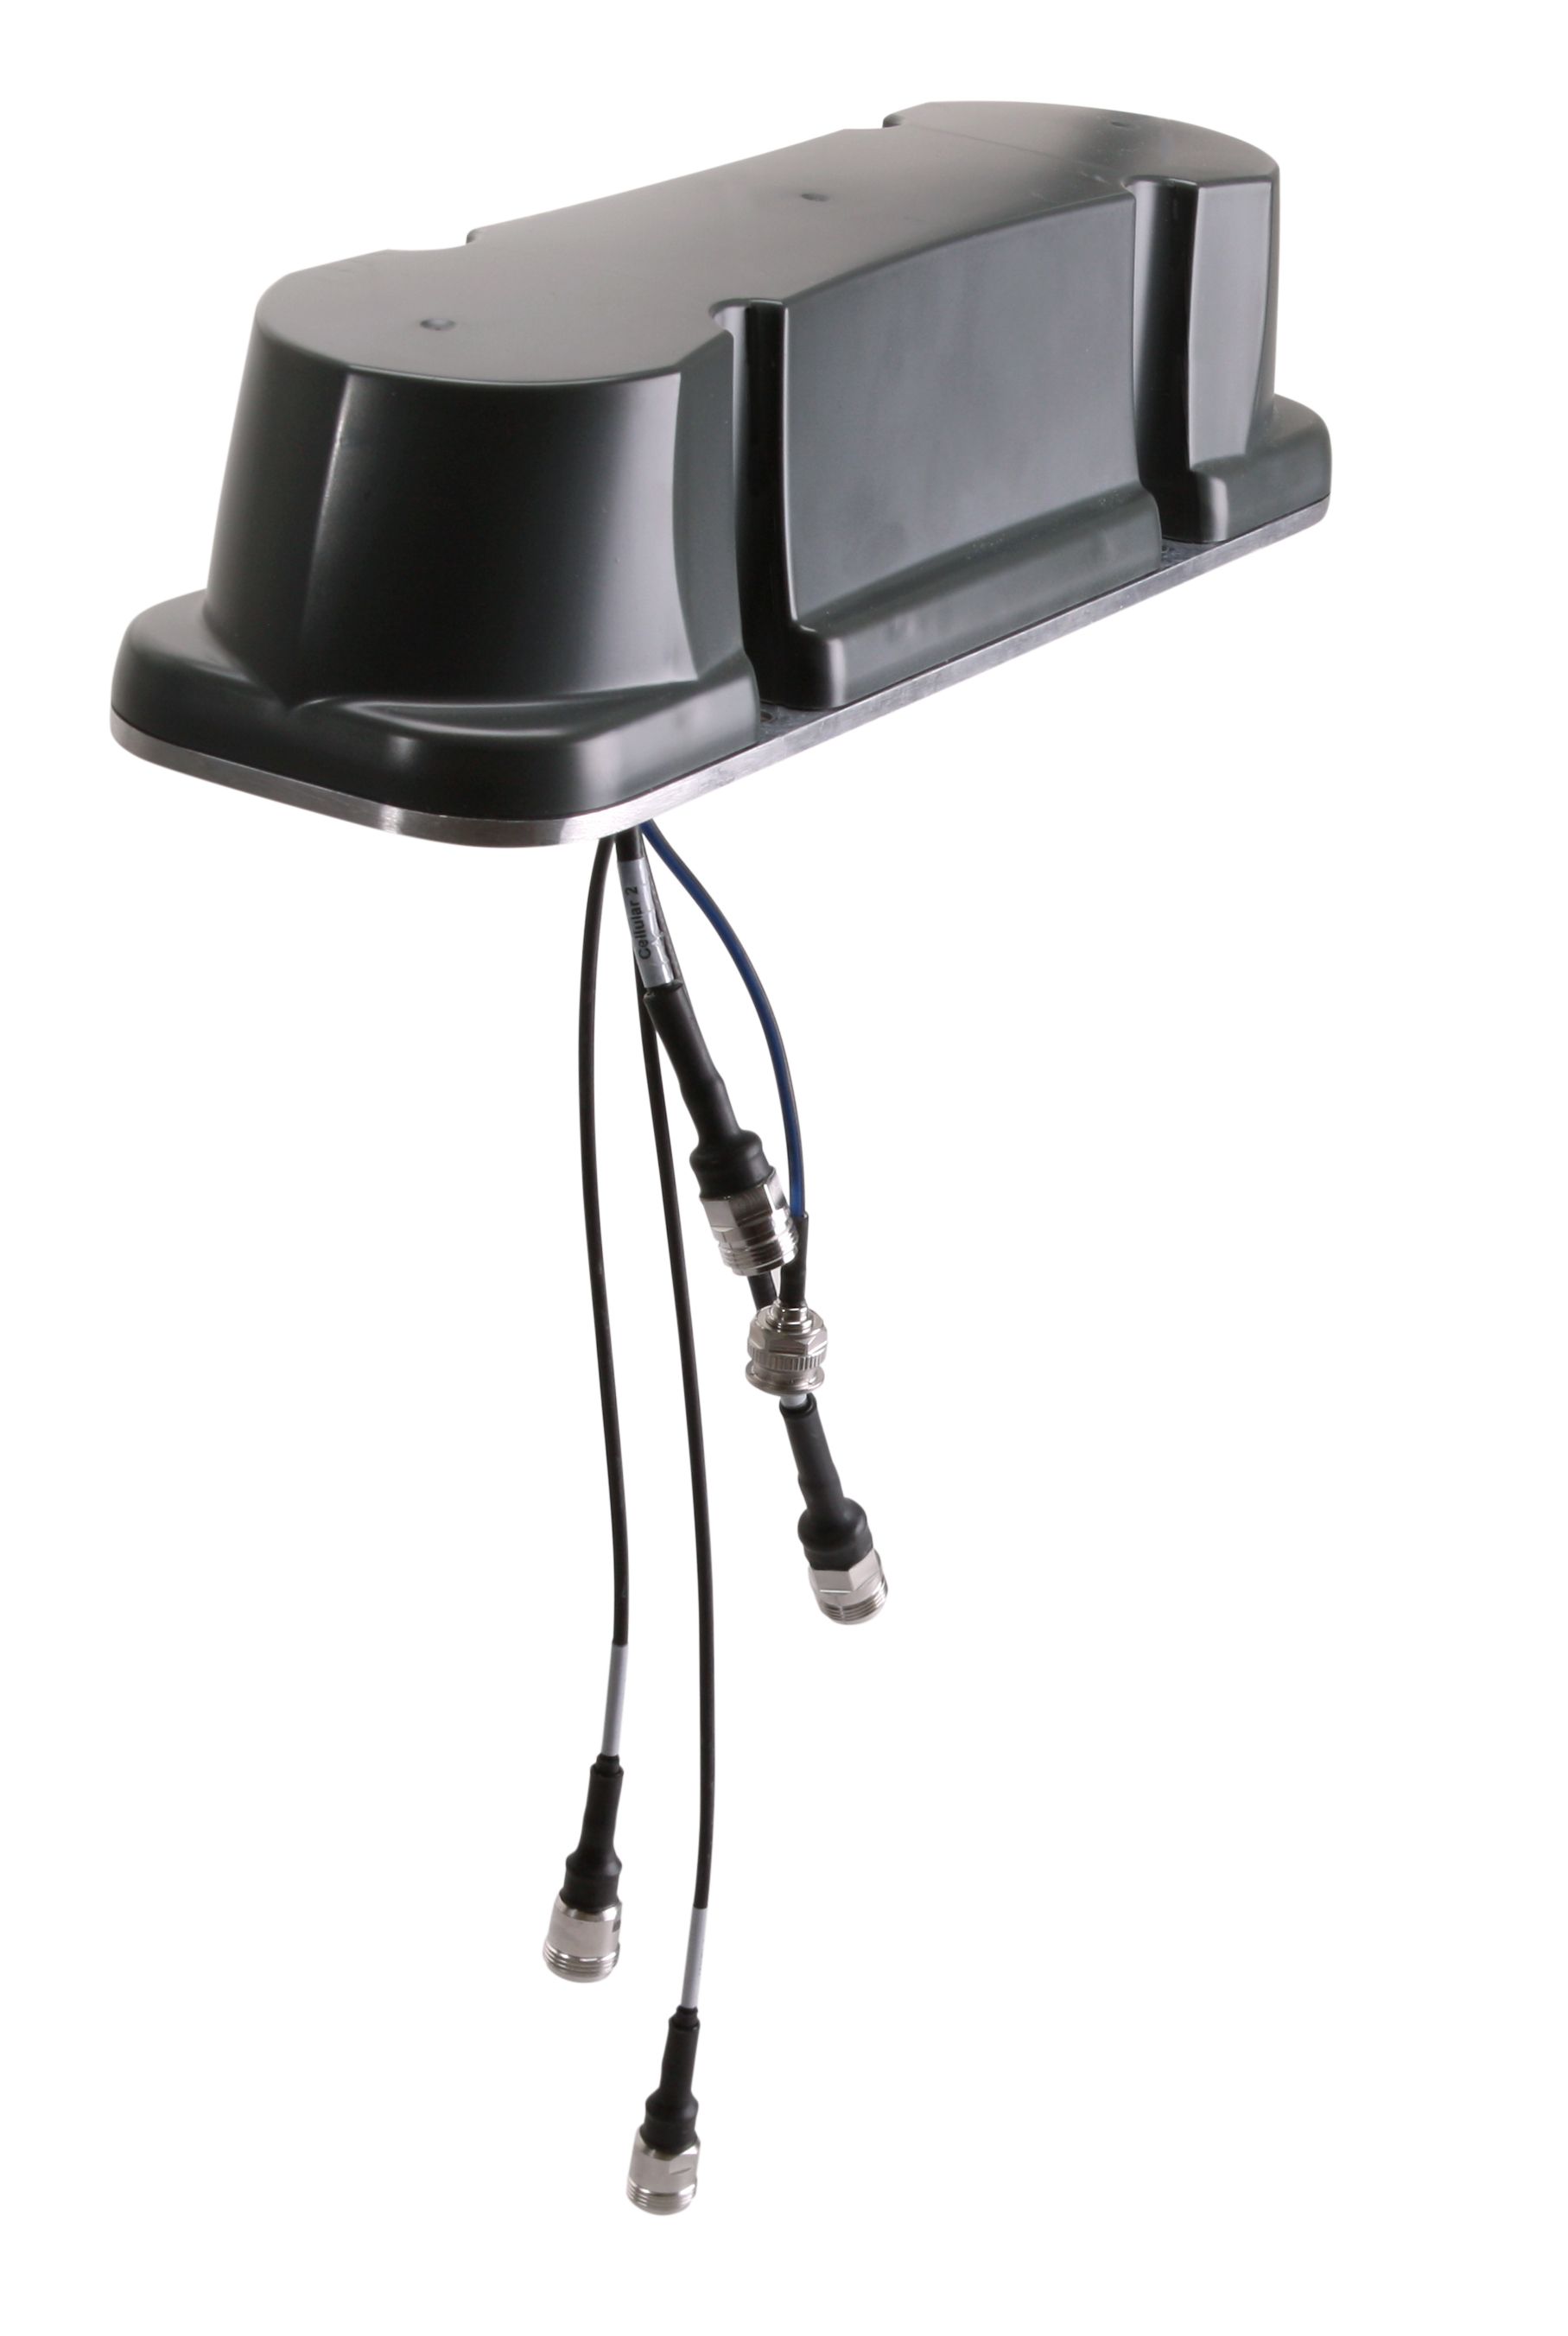 HUBER+SUHNER extends its SENCITY® Rail MIMO Antenna portfolio with dual-band GNSS services